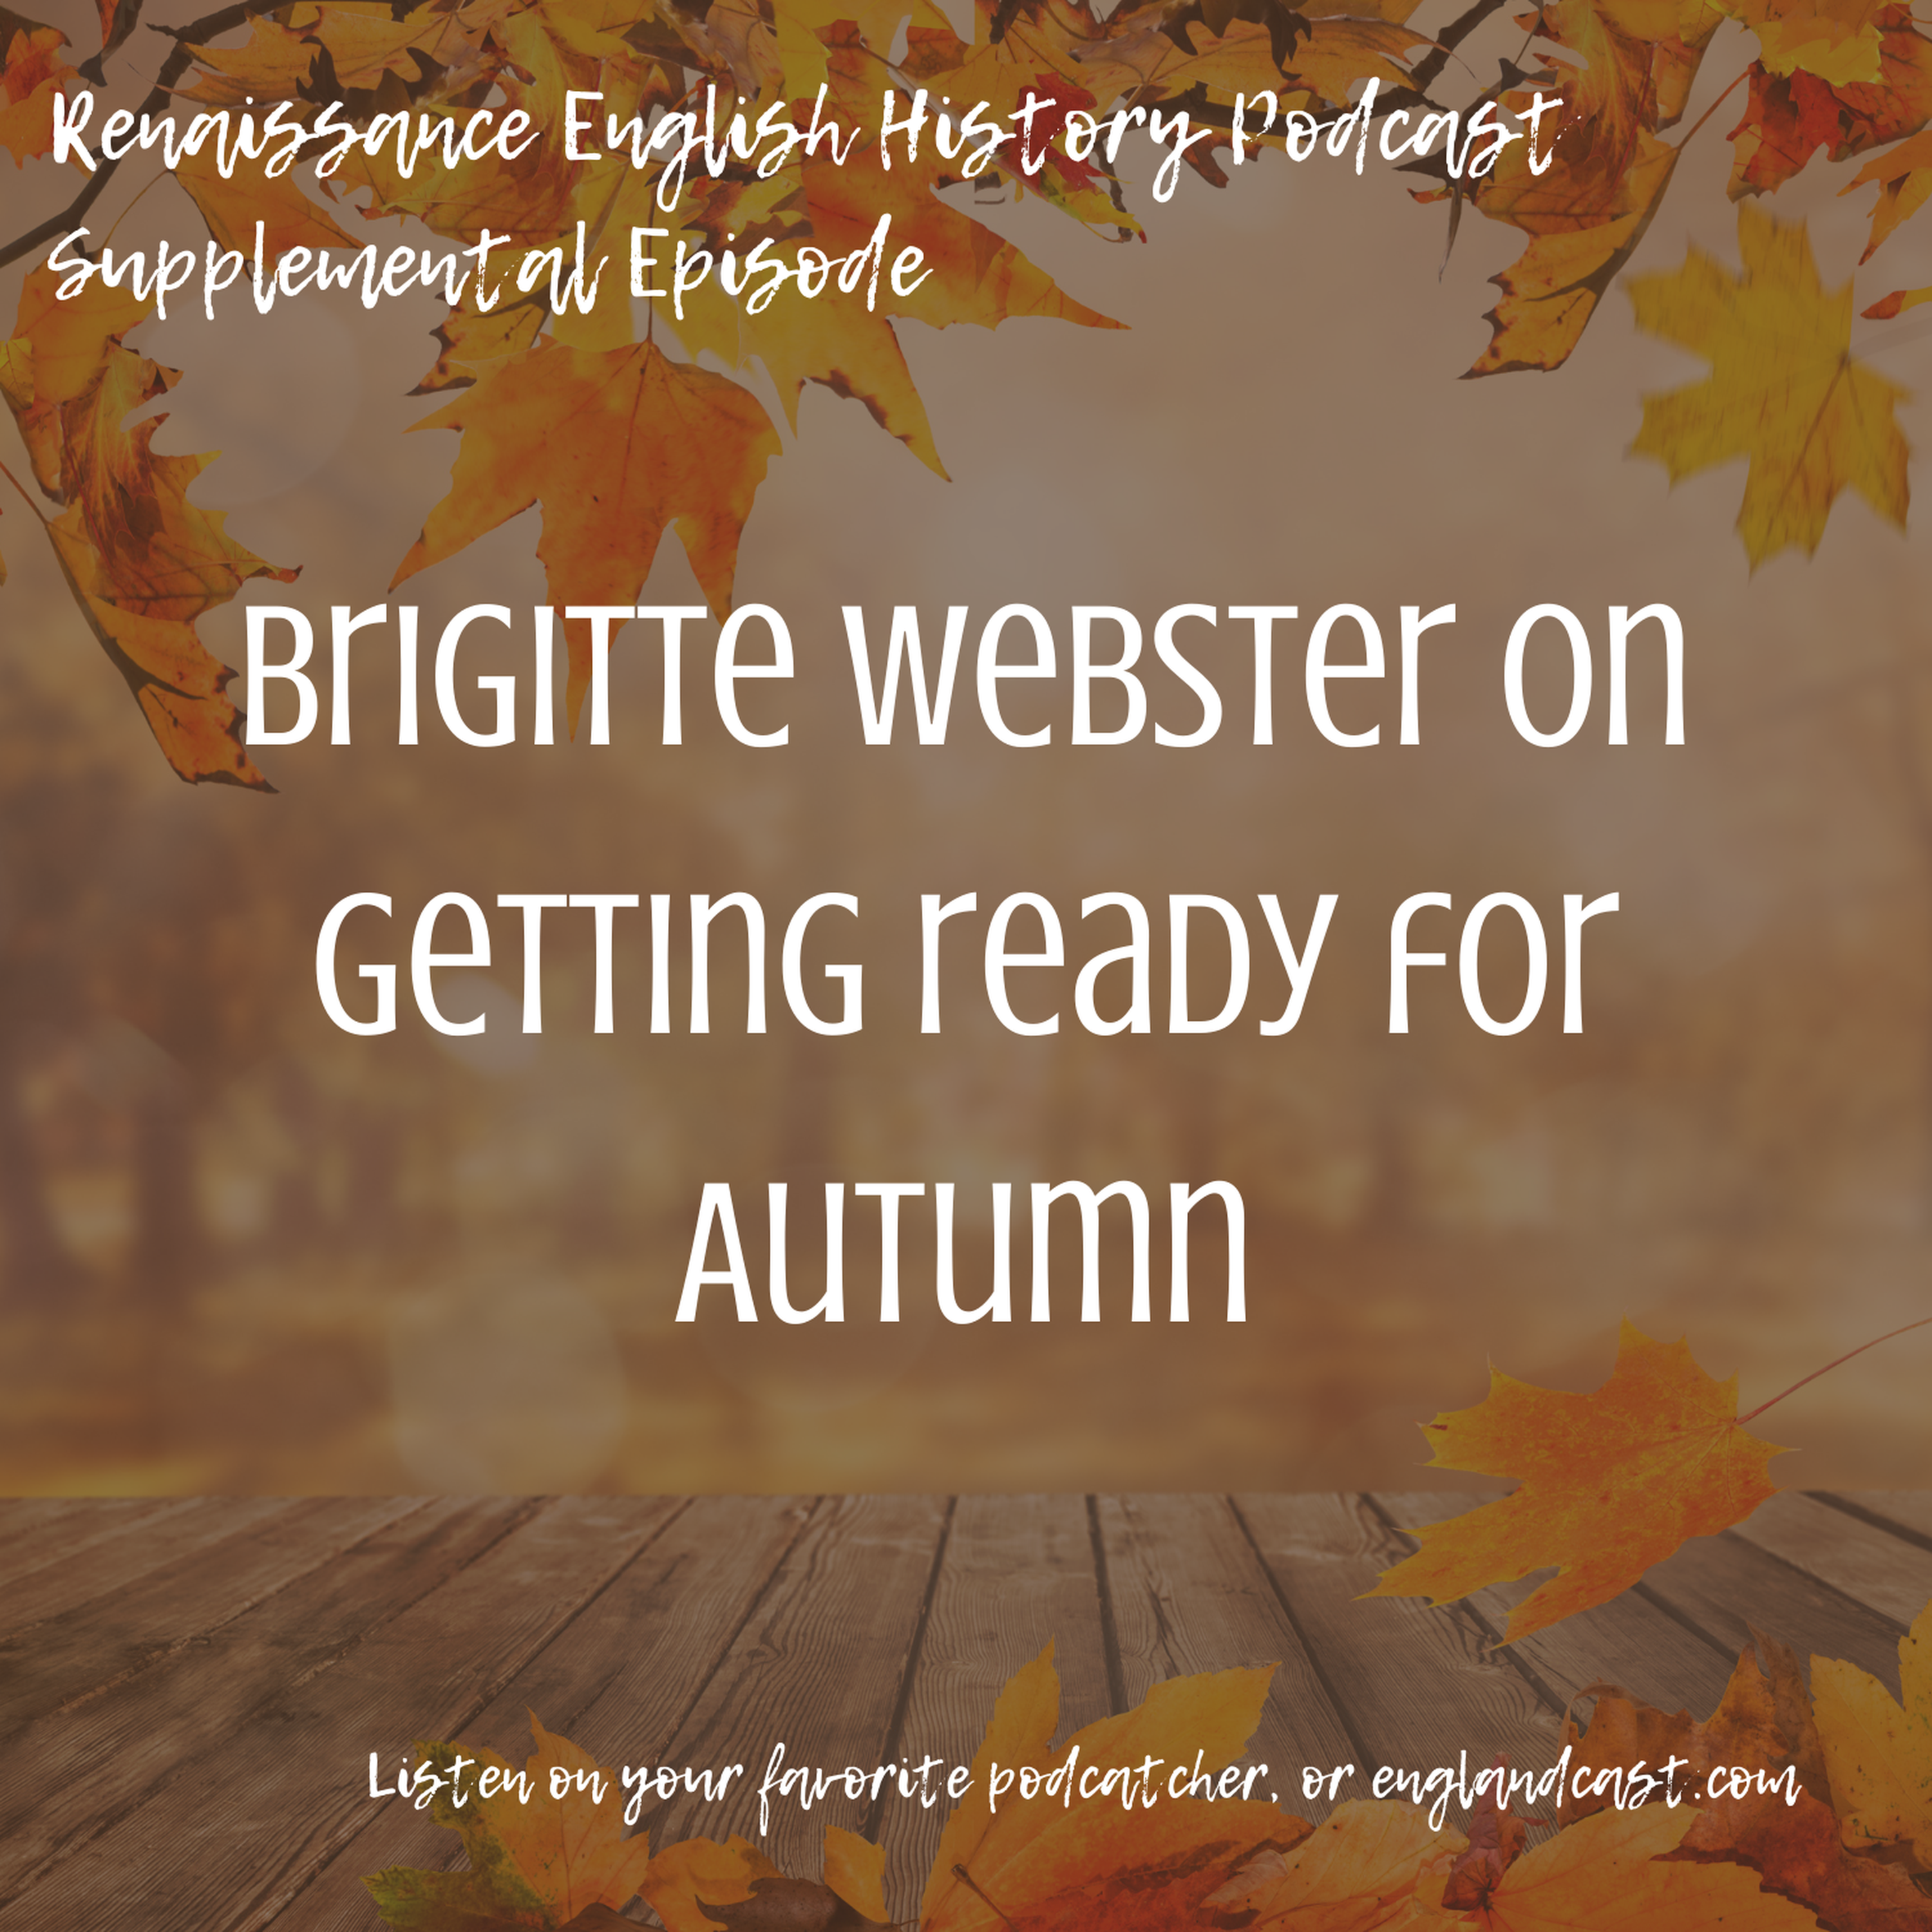 Supplemental: Brigitte Webster in the TLC talking about getting ready for winter